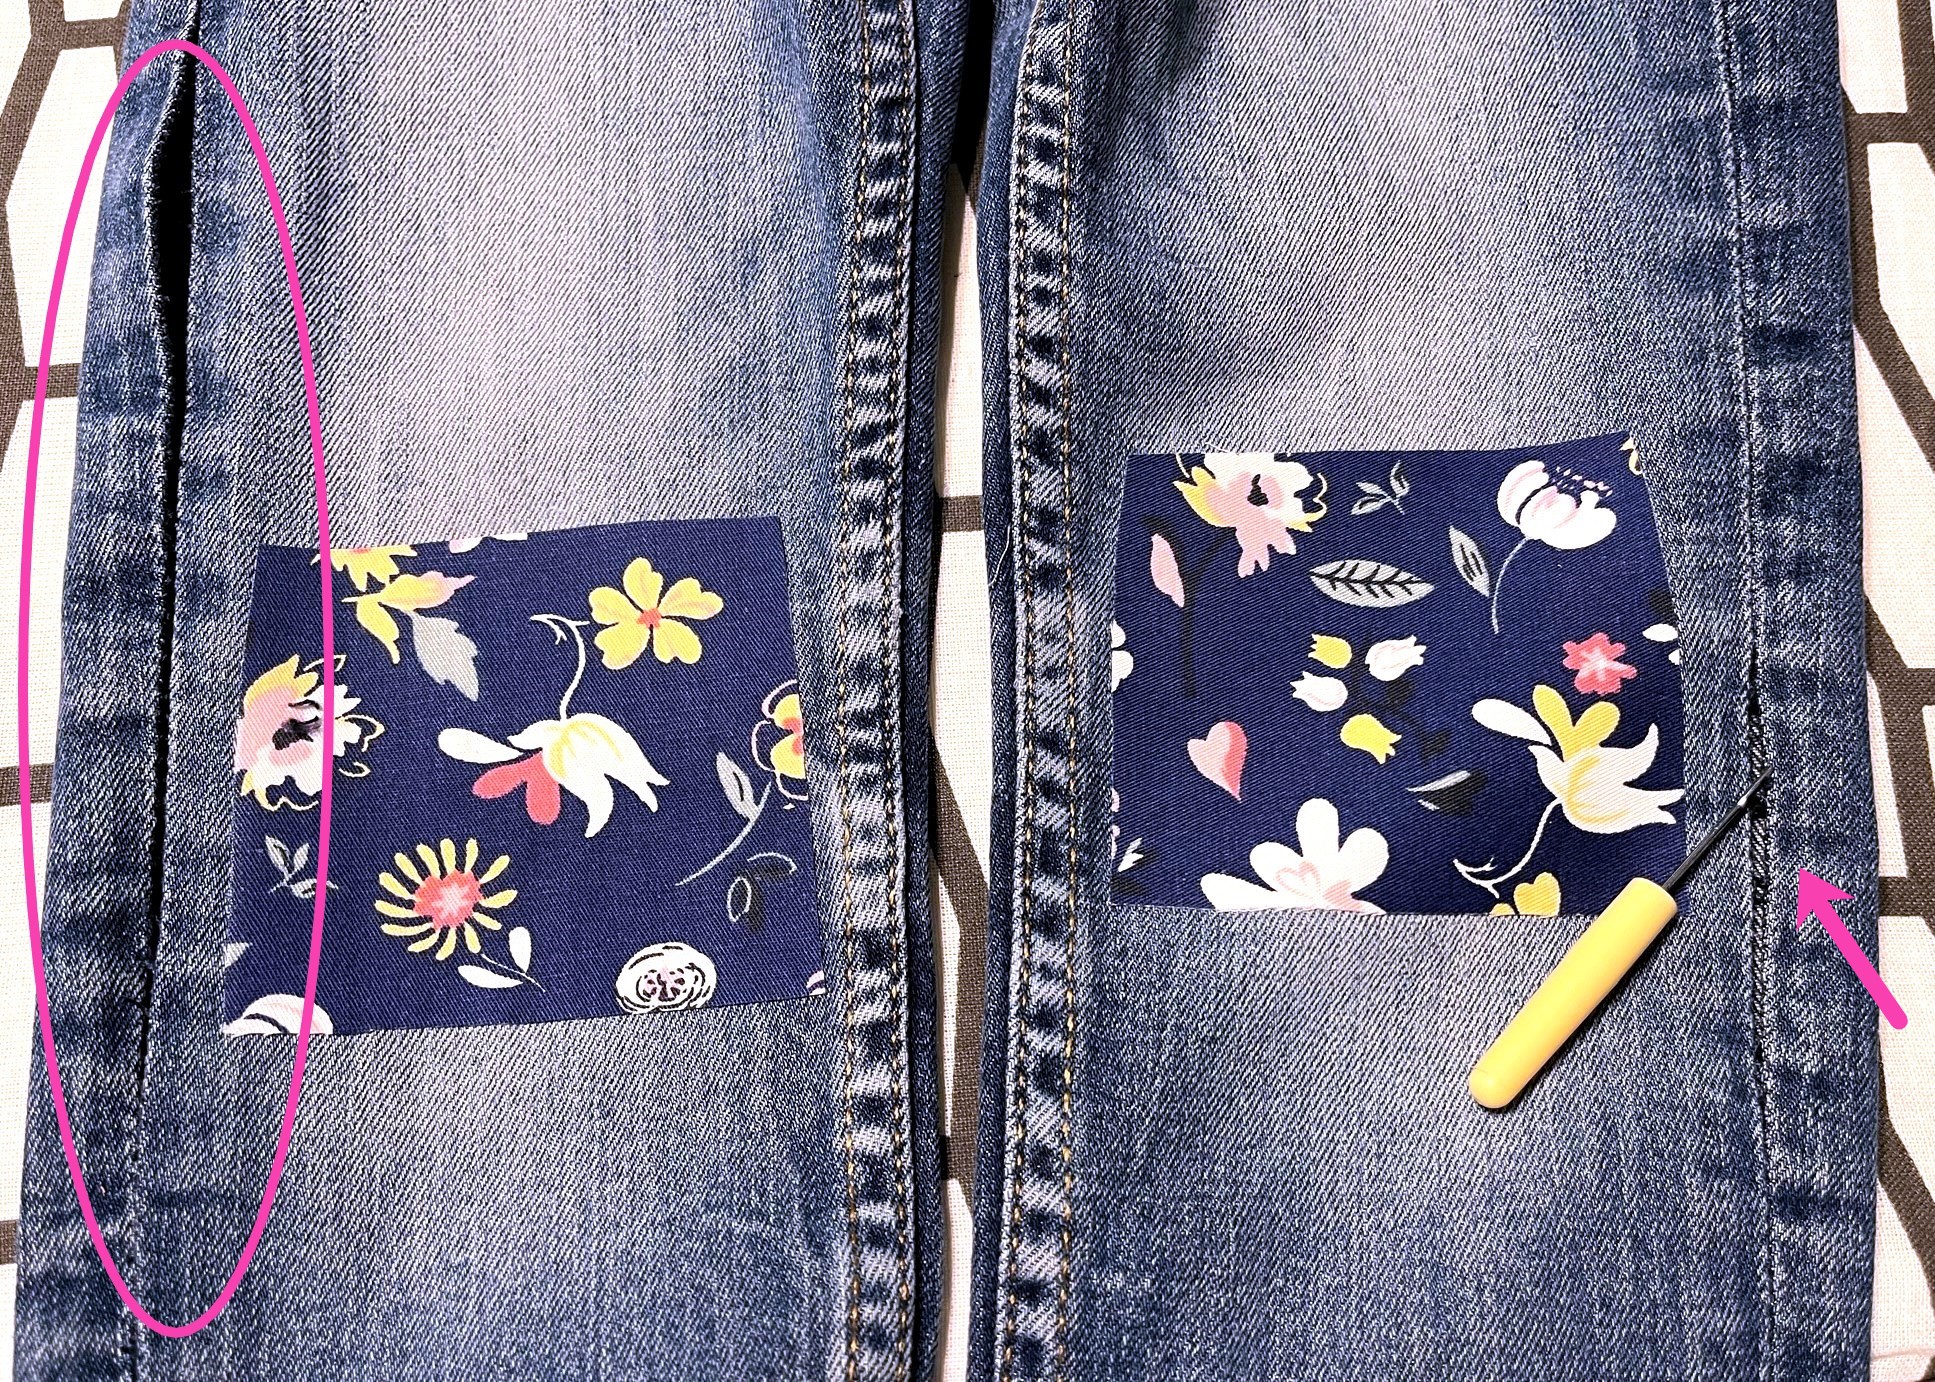 Creative Jean Patches